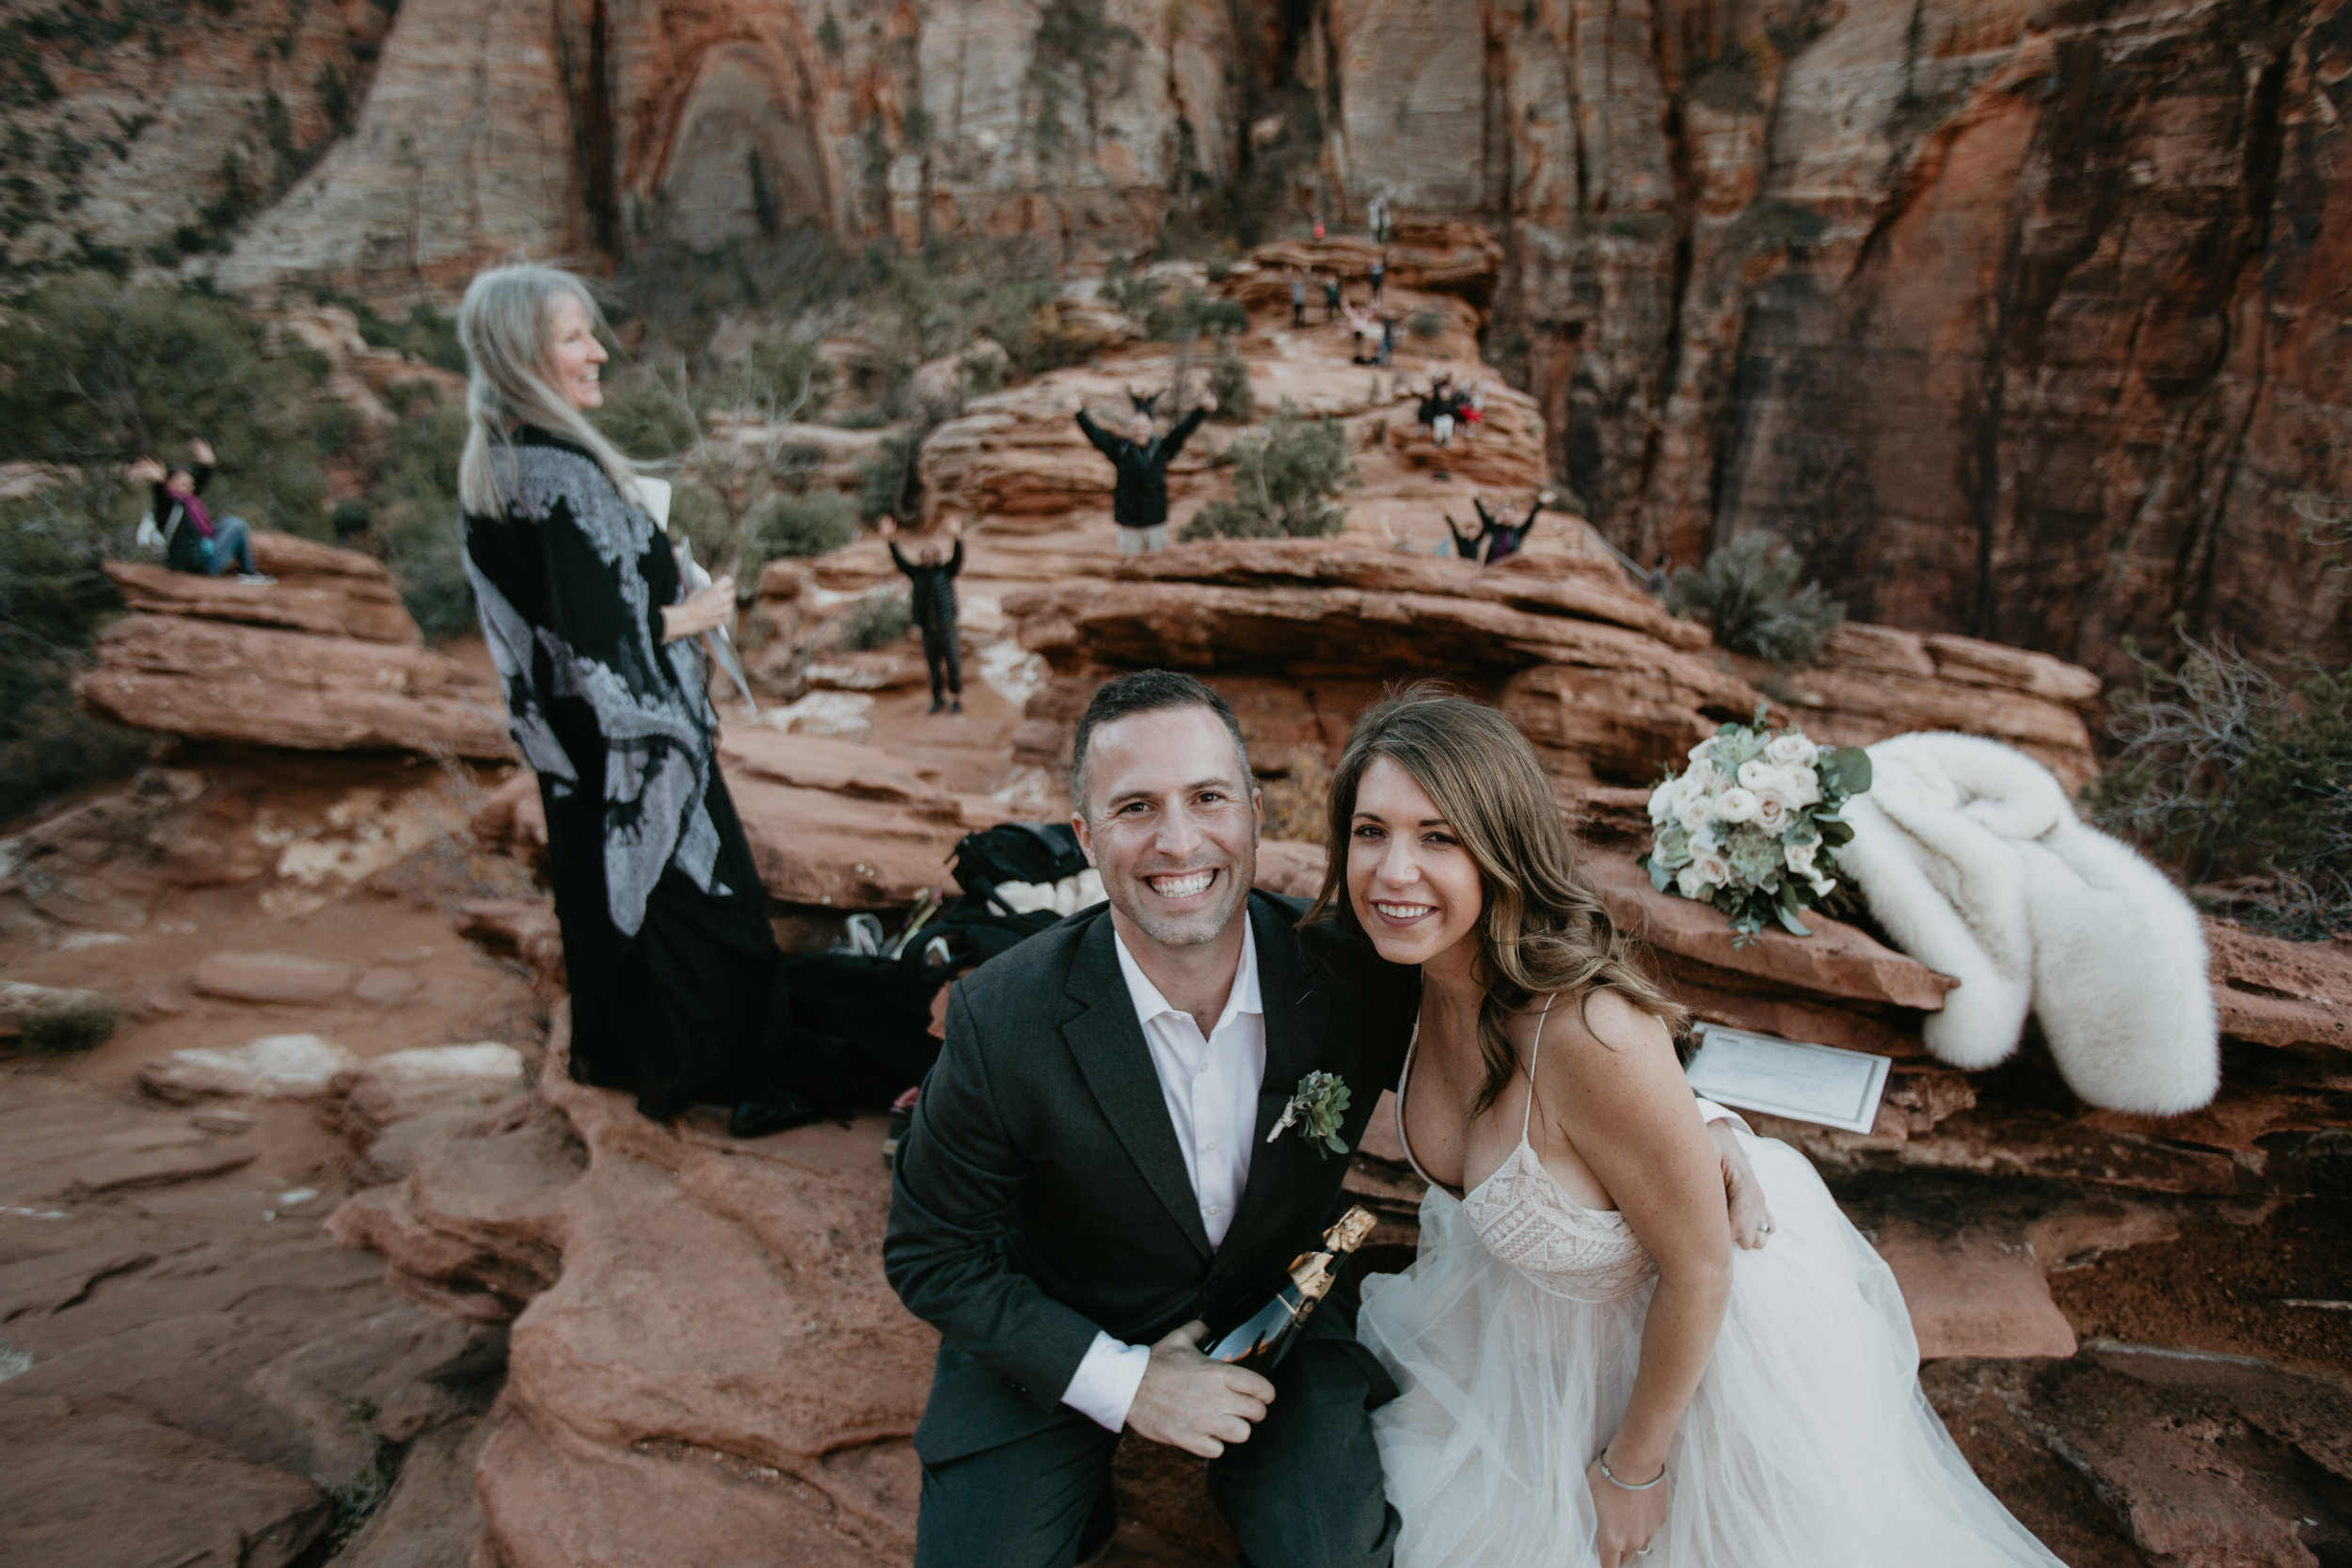 nicole-daacke-photography-zion-national-park-elopement-photographer-canyon-overlook-trail-elope-hiking-adventure-wedding-photos-fall-utah-red-rock-canyon-stgeorge-eloping-photographer-64.jpg